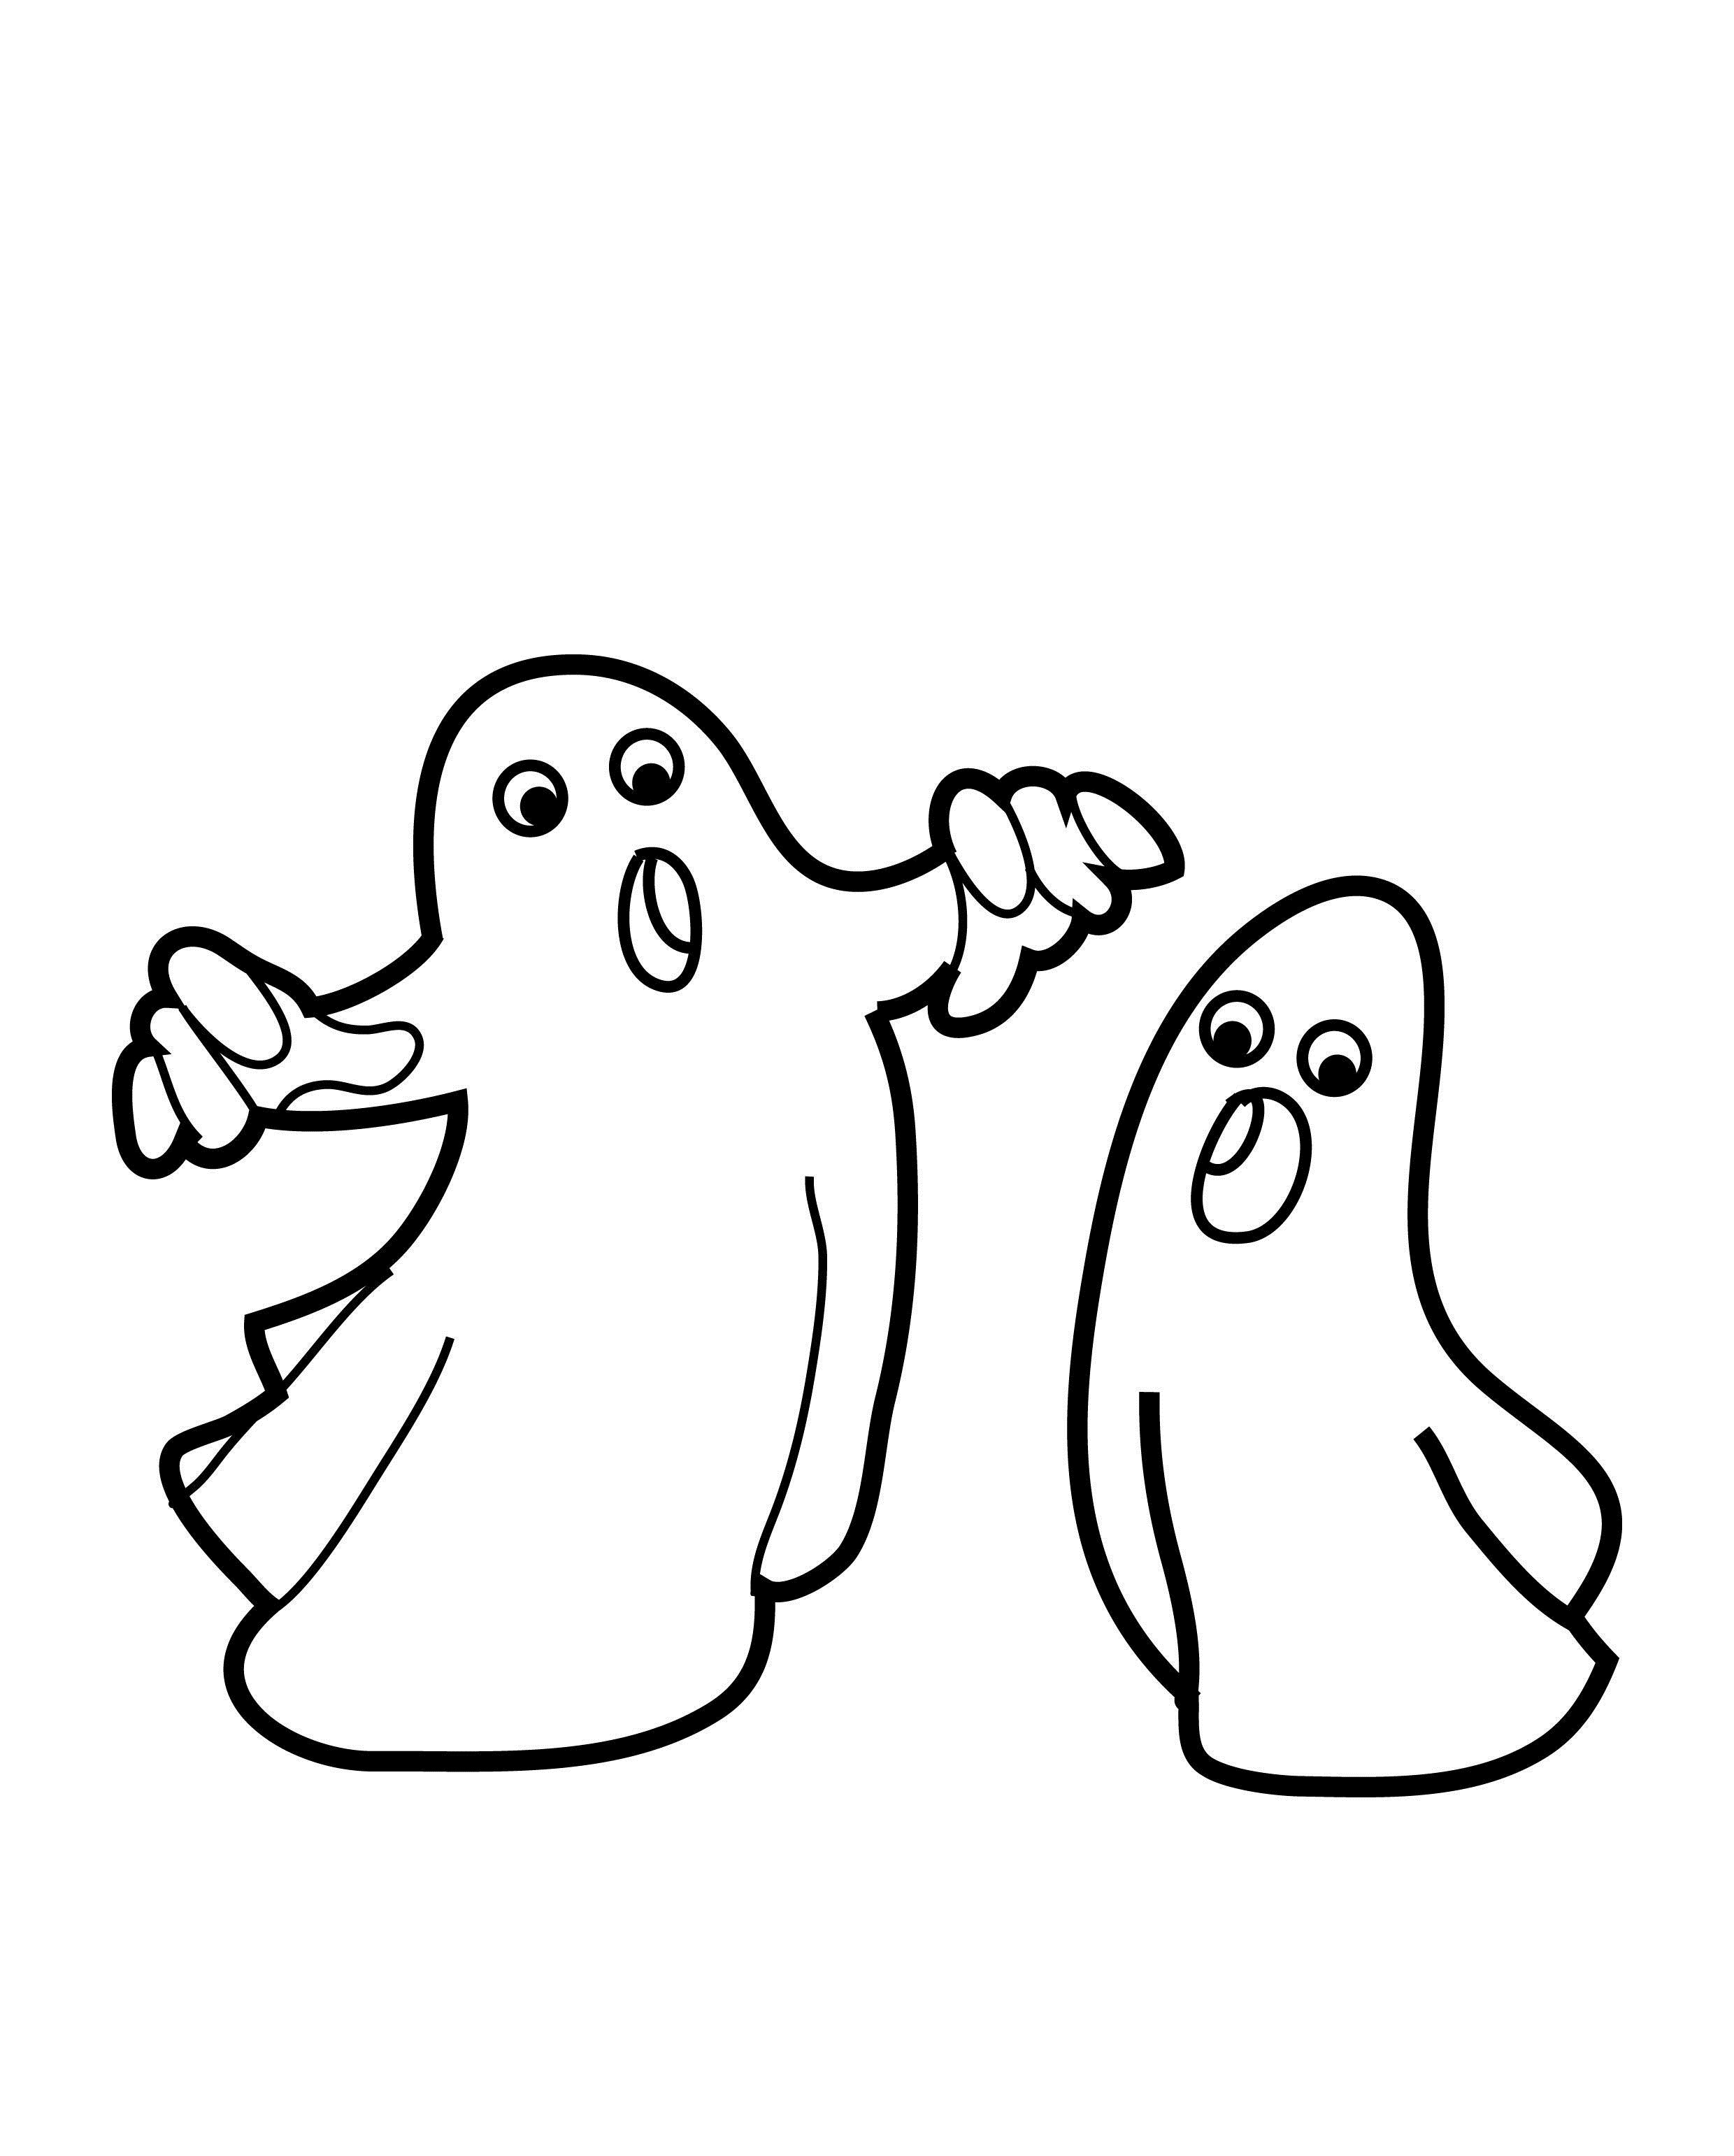 Scary Ghost Coloring Pages at GetColorings.com | Free printable